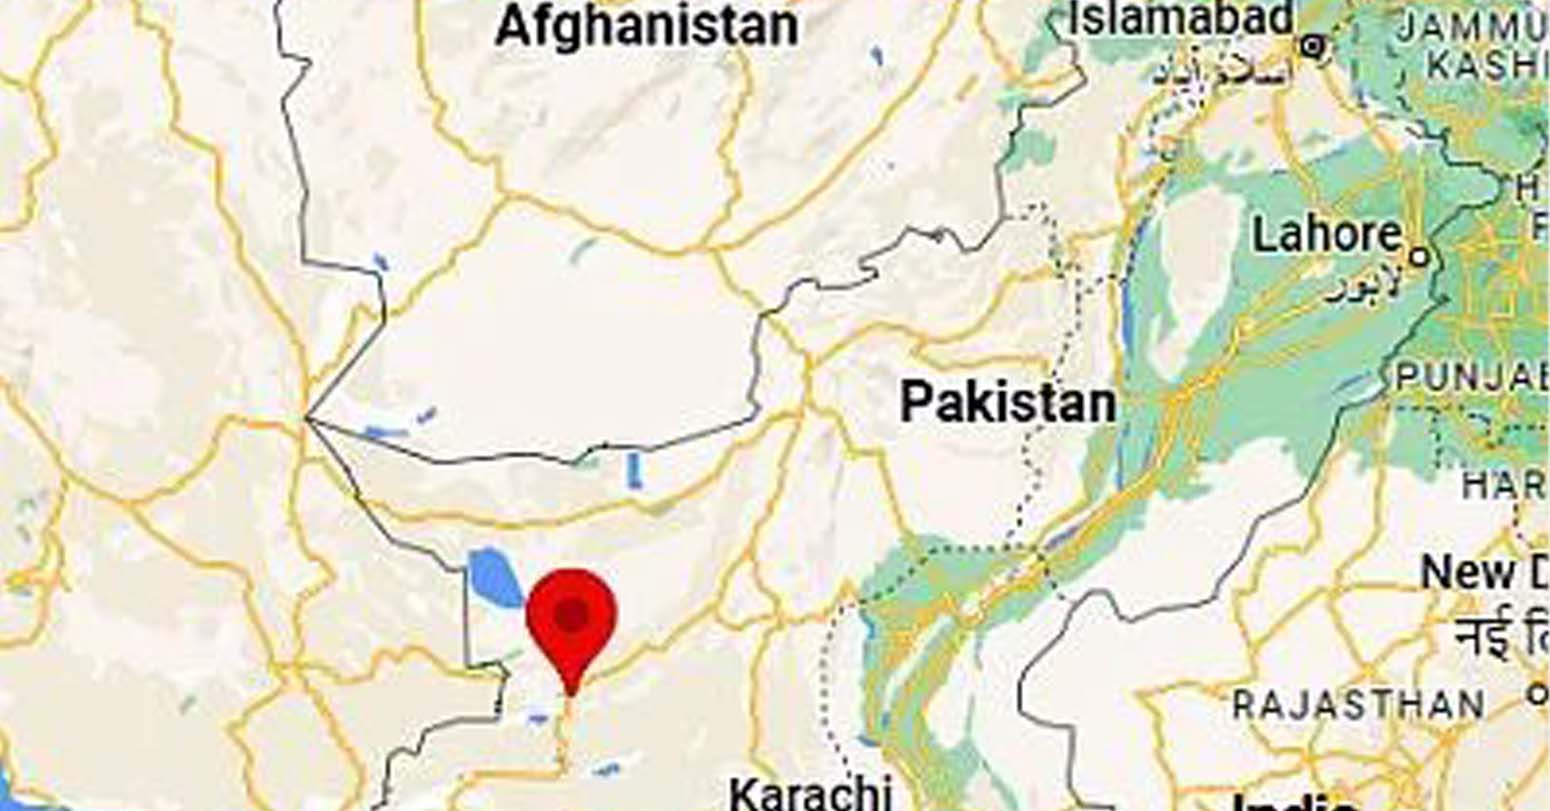 2 Killed, 3 Injured In Pakistan From Iran’s Airspace Violation